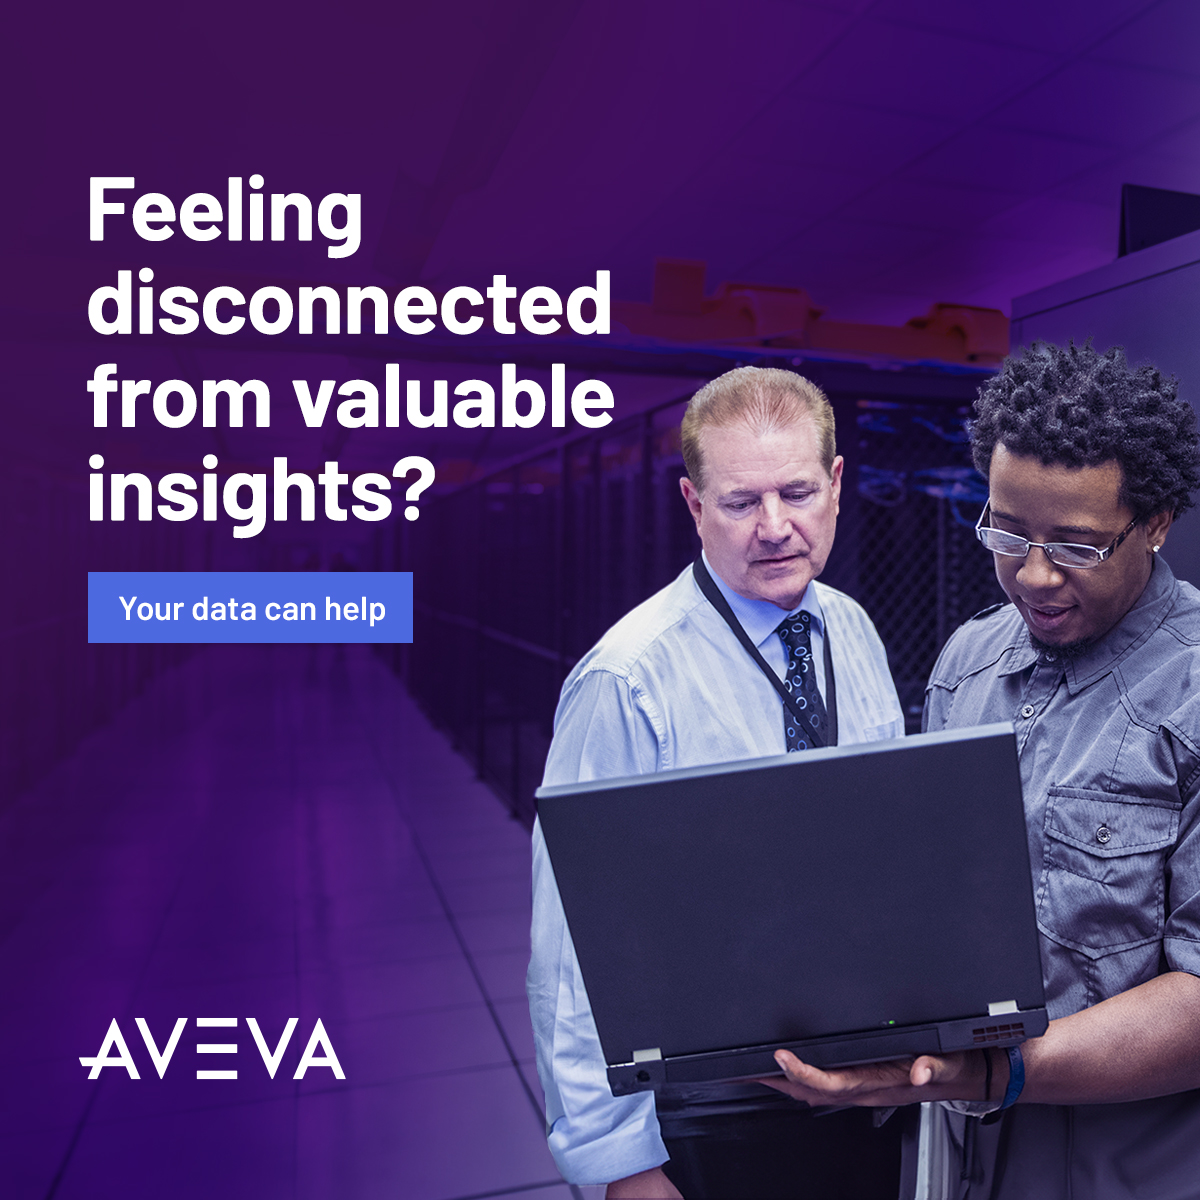 Bridge the gaps in your industrial 🏭 ecosystem and gain a 360° view of your #operations for faster, smarter business decisions.

Learn more about AVEVA Connect’s new features and advanced data services . Read the blog ➡️ bit.ly/48JjpMK #cloud #datasharing #AVEVAConnect